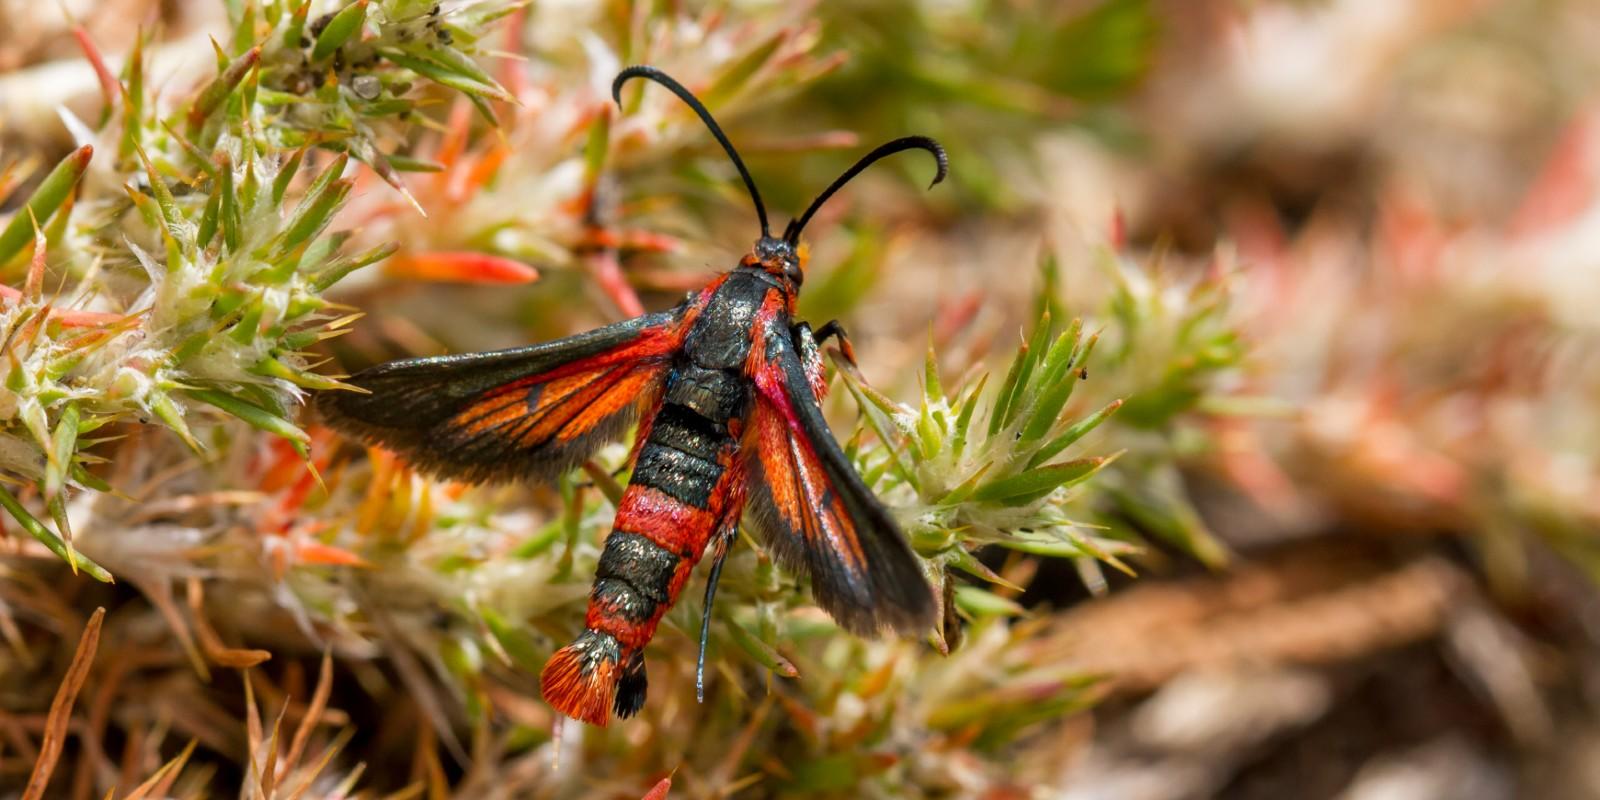 Close up of red moth, the buckwheat root borer, crawling in the grass.